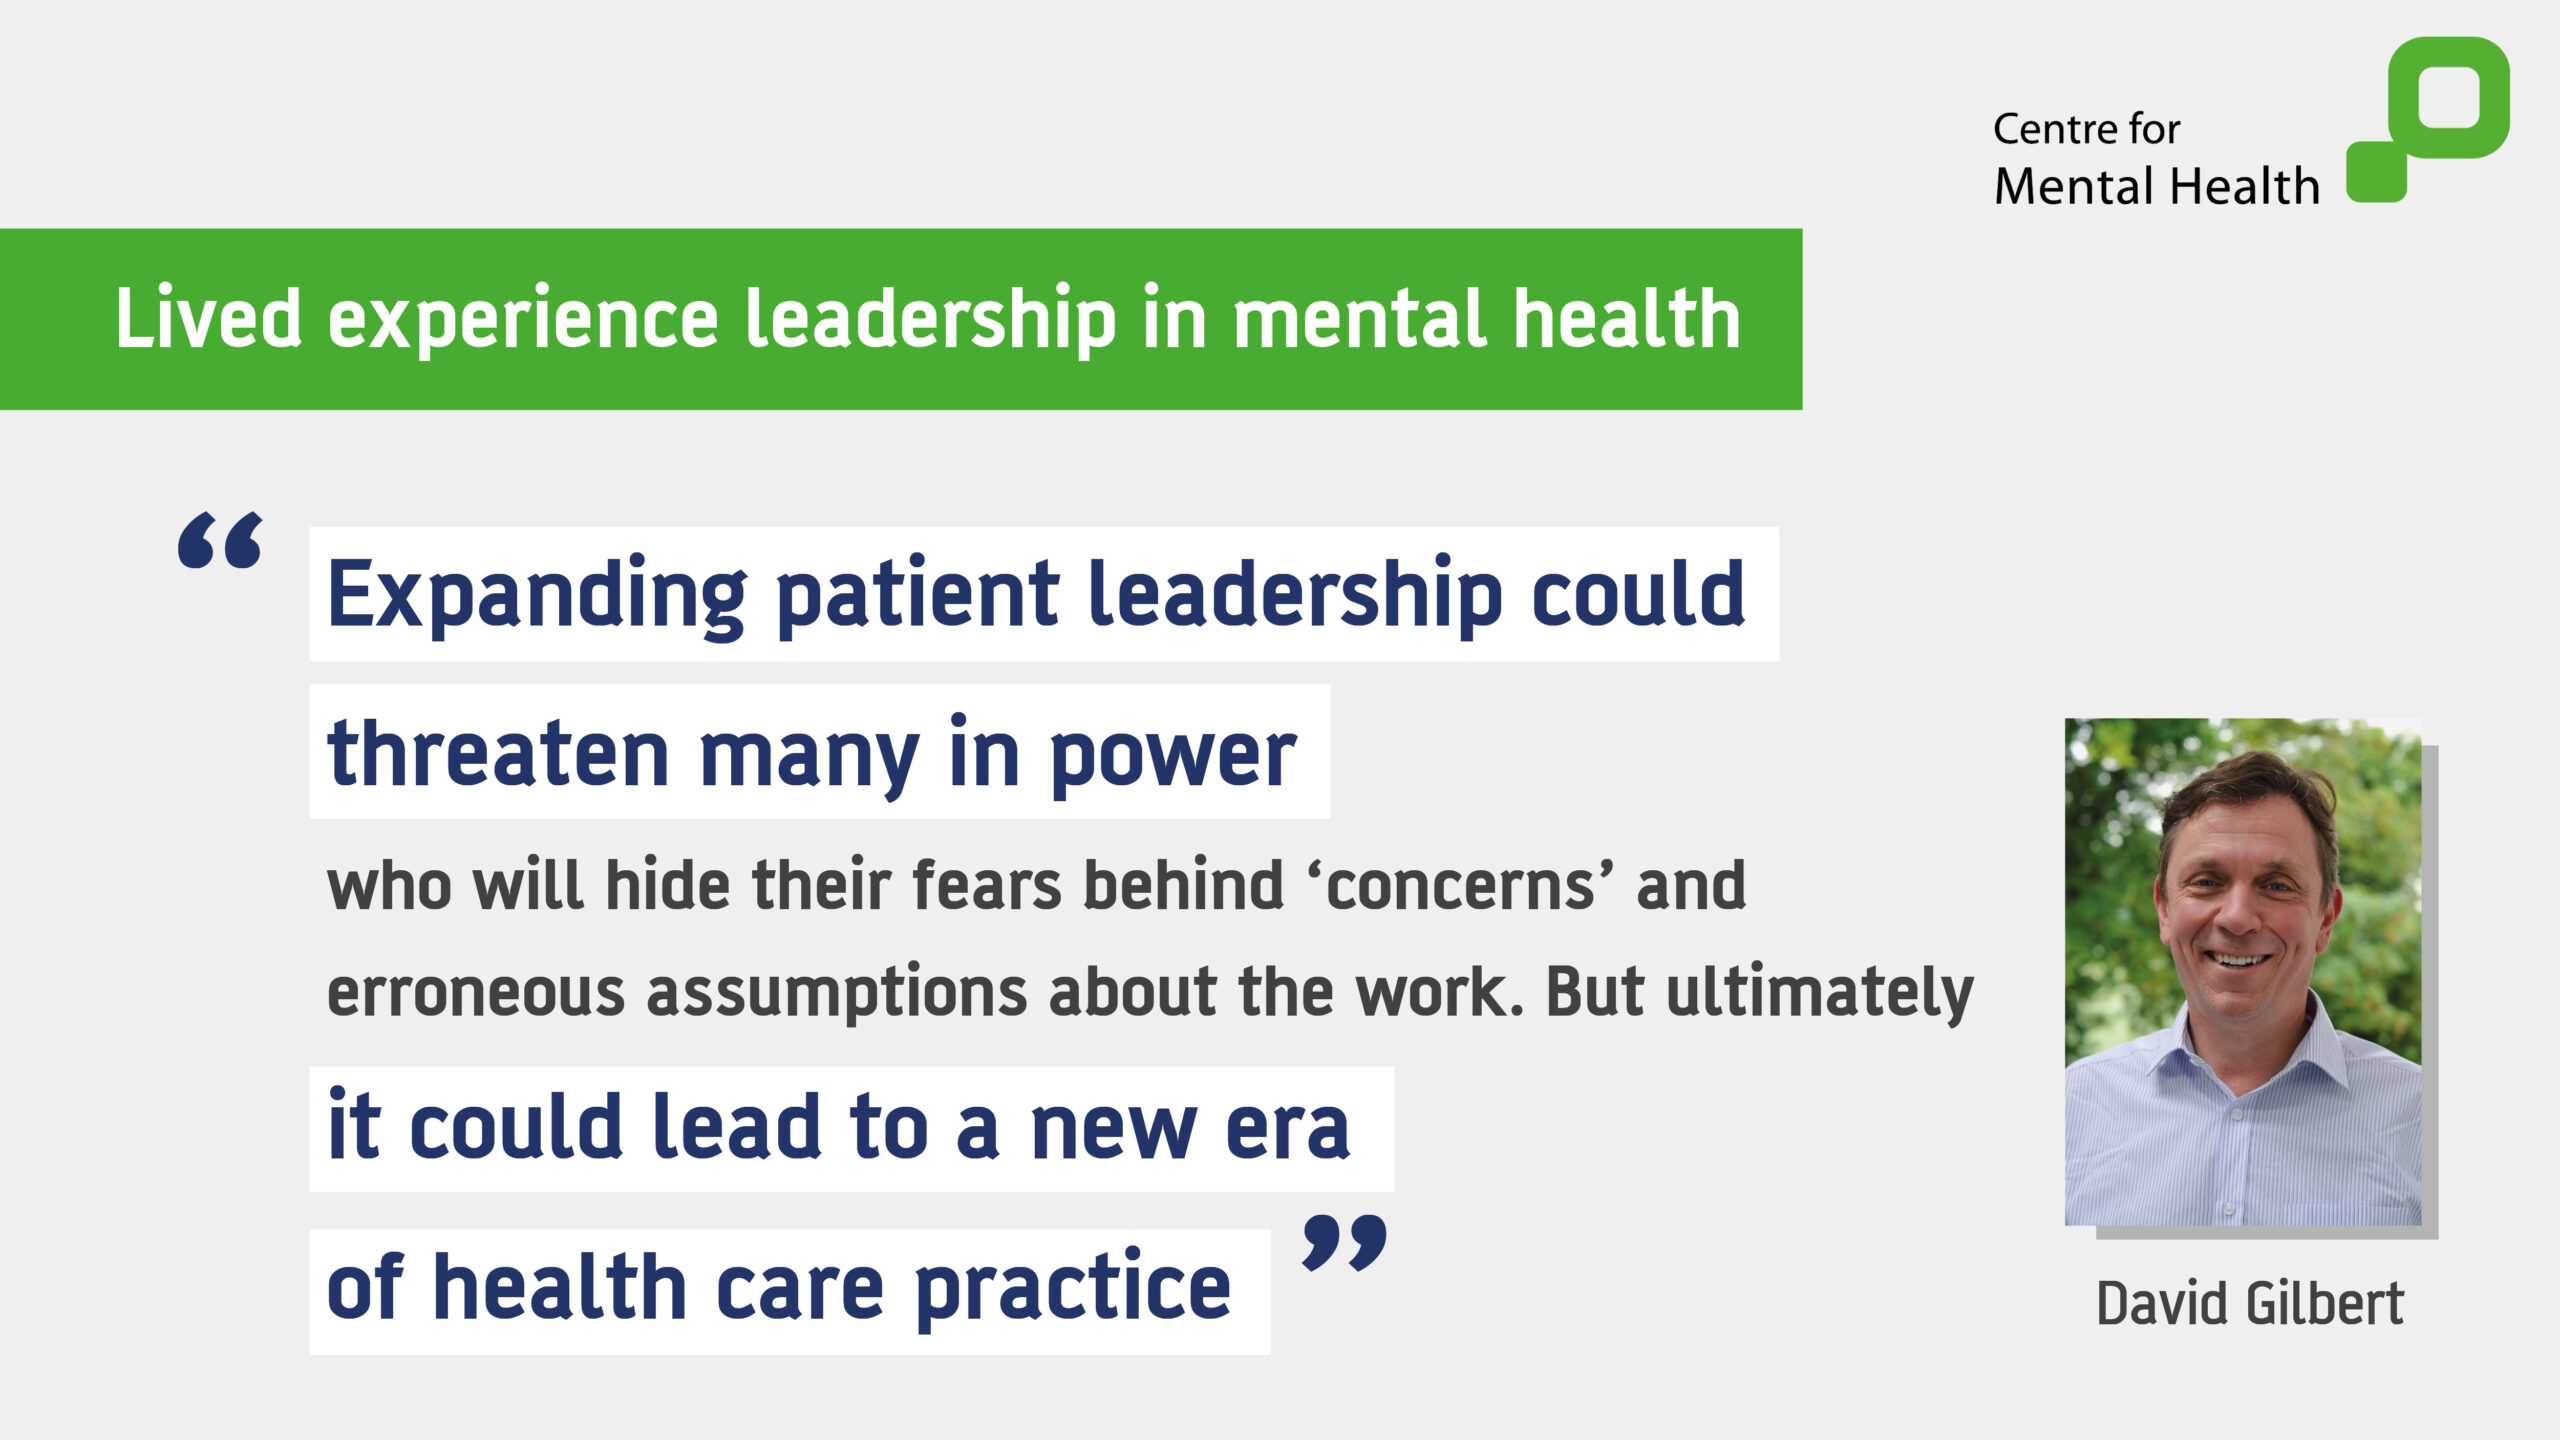 Title: Lived experience leadership in mental health Quote: Expanding patient leadership could threaten many in power who will hide their fears behind 'concerns' and erroneous assumptions about the work. But ultimately, it could lead to a new era of health care practice". Image: David Gilbert 